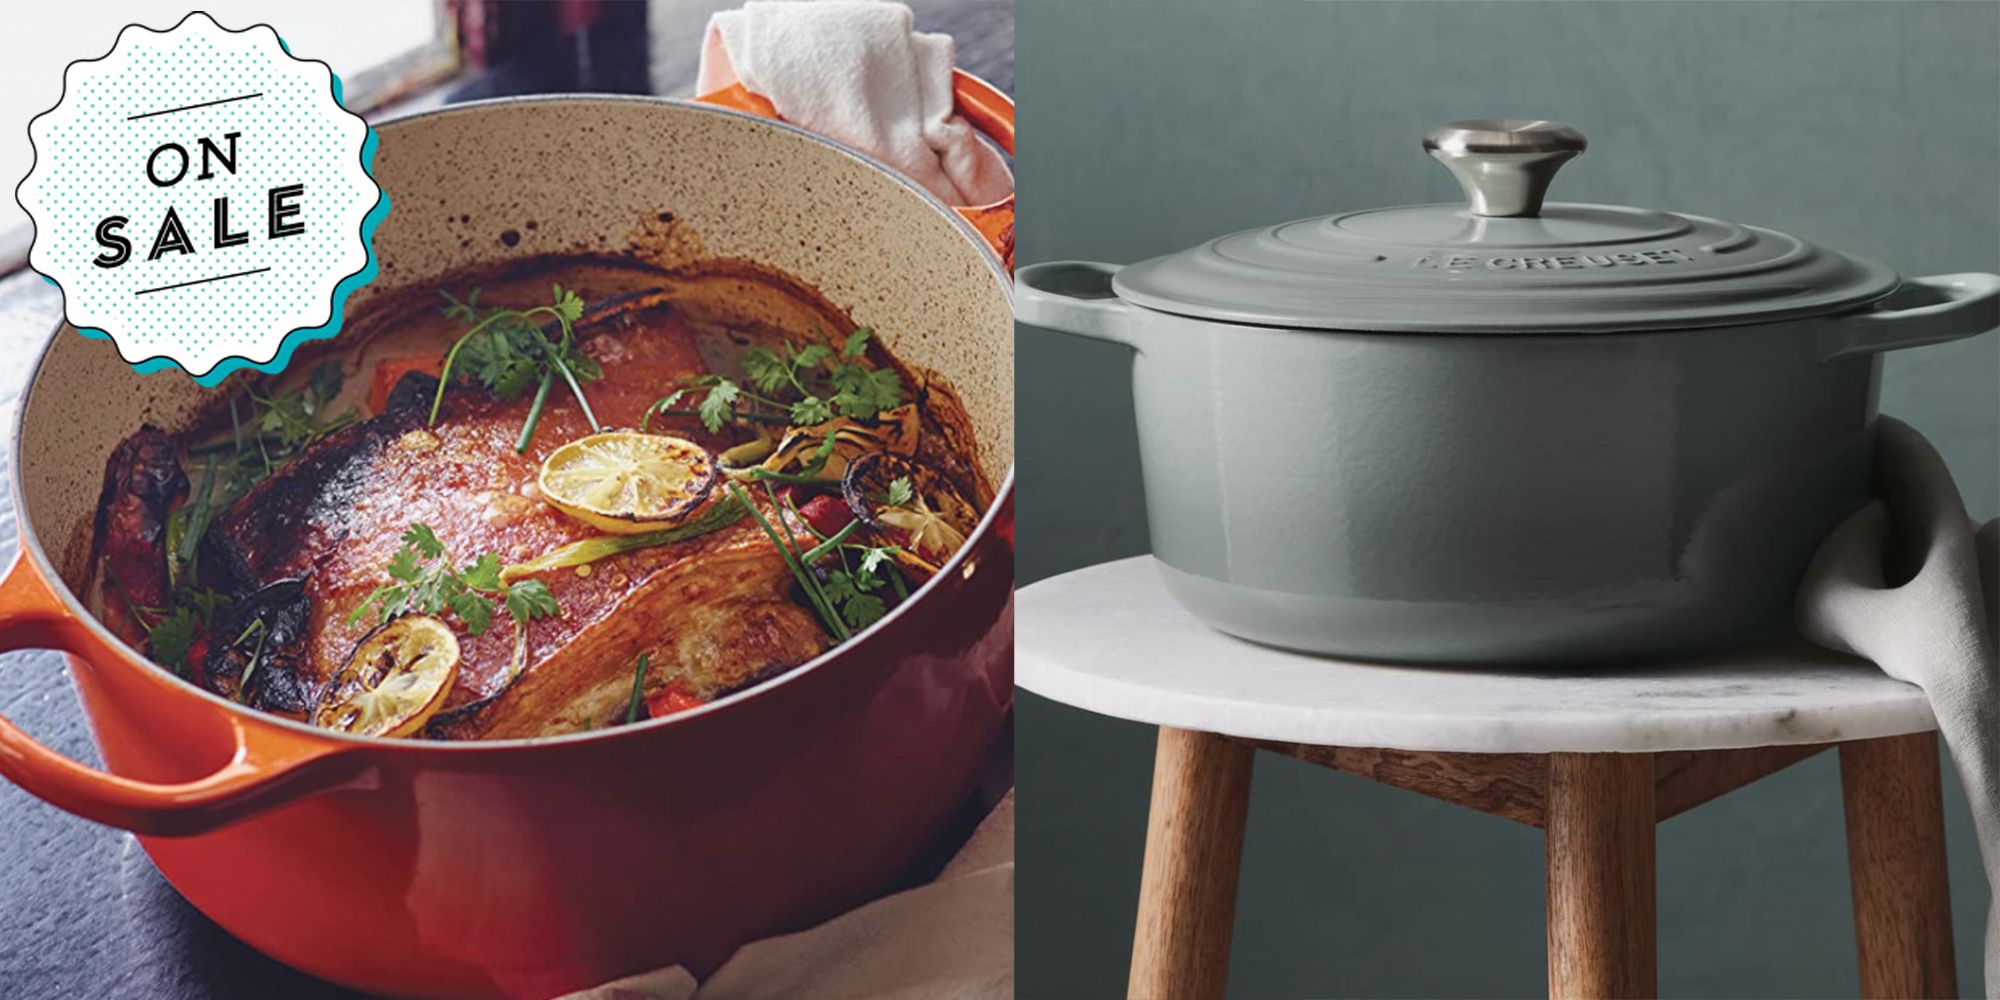 Made In cookware Labor Day sale: Save up to 30% on Dutch ovens